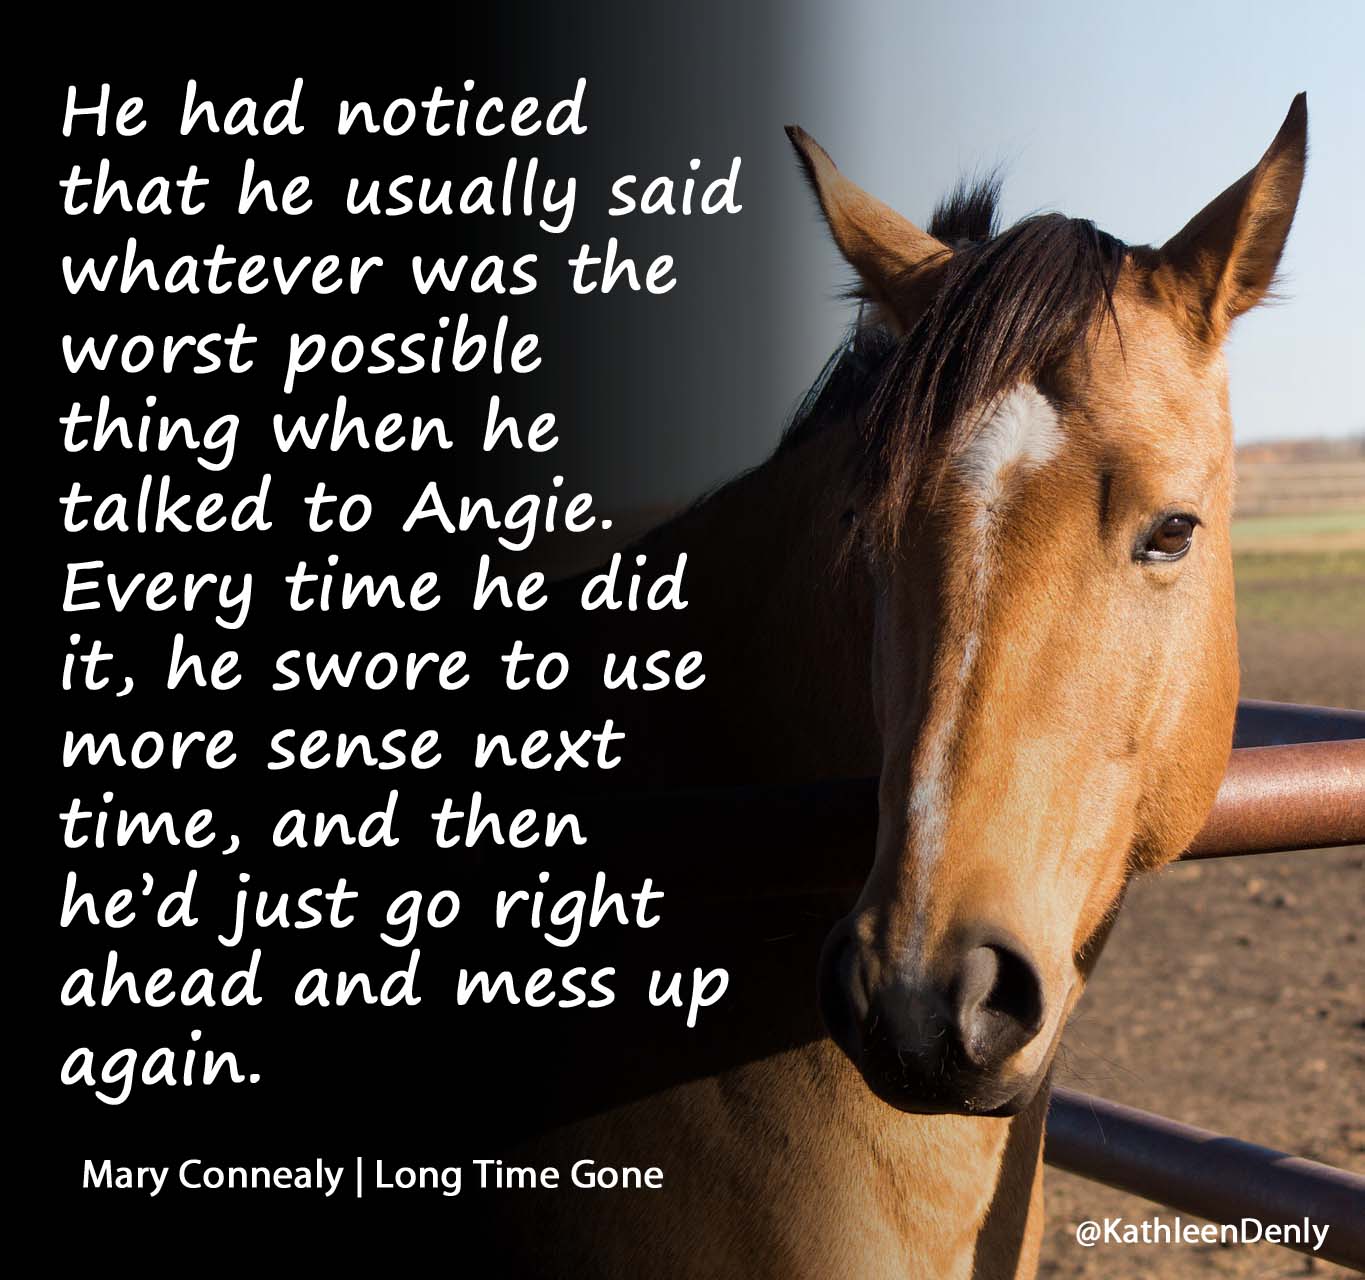 Long Time Gone Quote Image 2